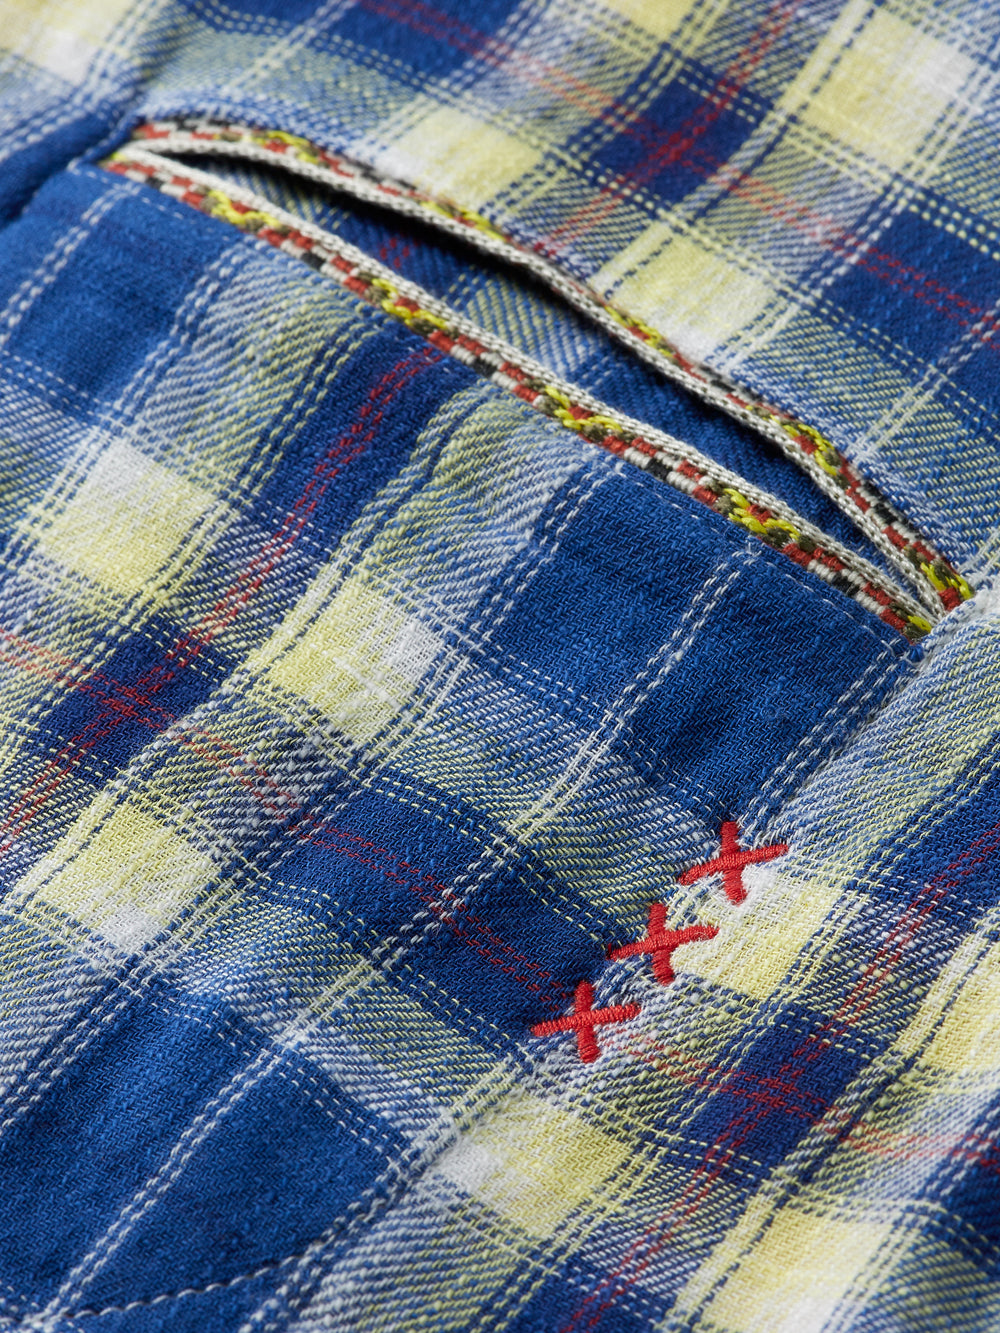 Checked flannel shirt with sleeve adjustments - Scotch & Soda AU